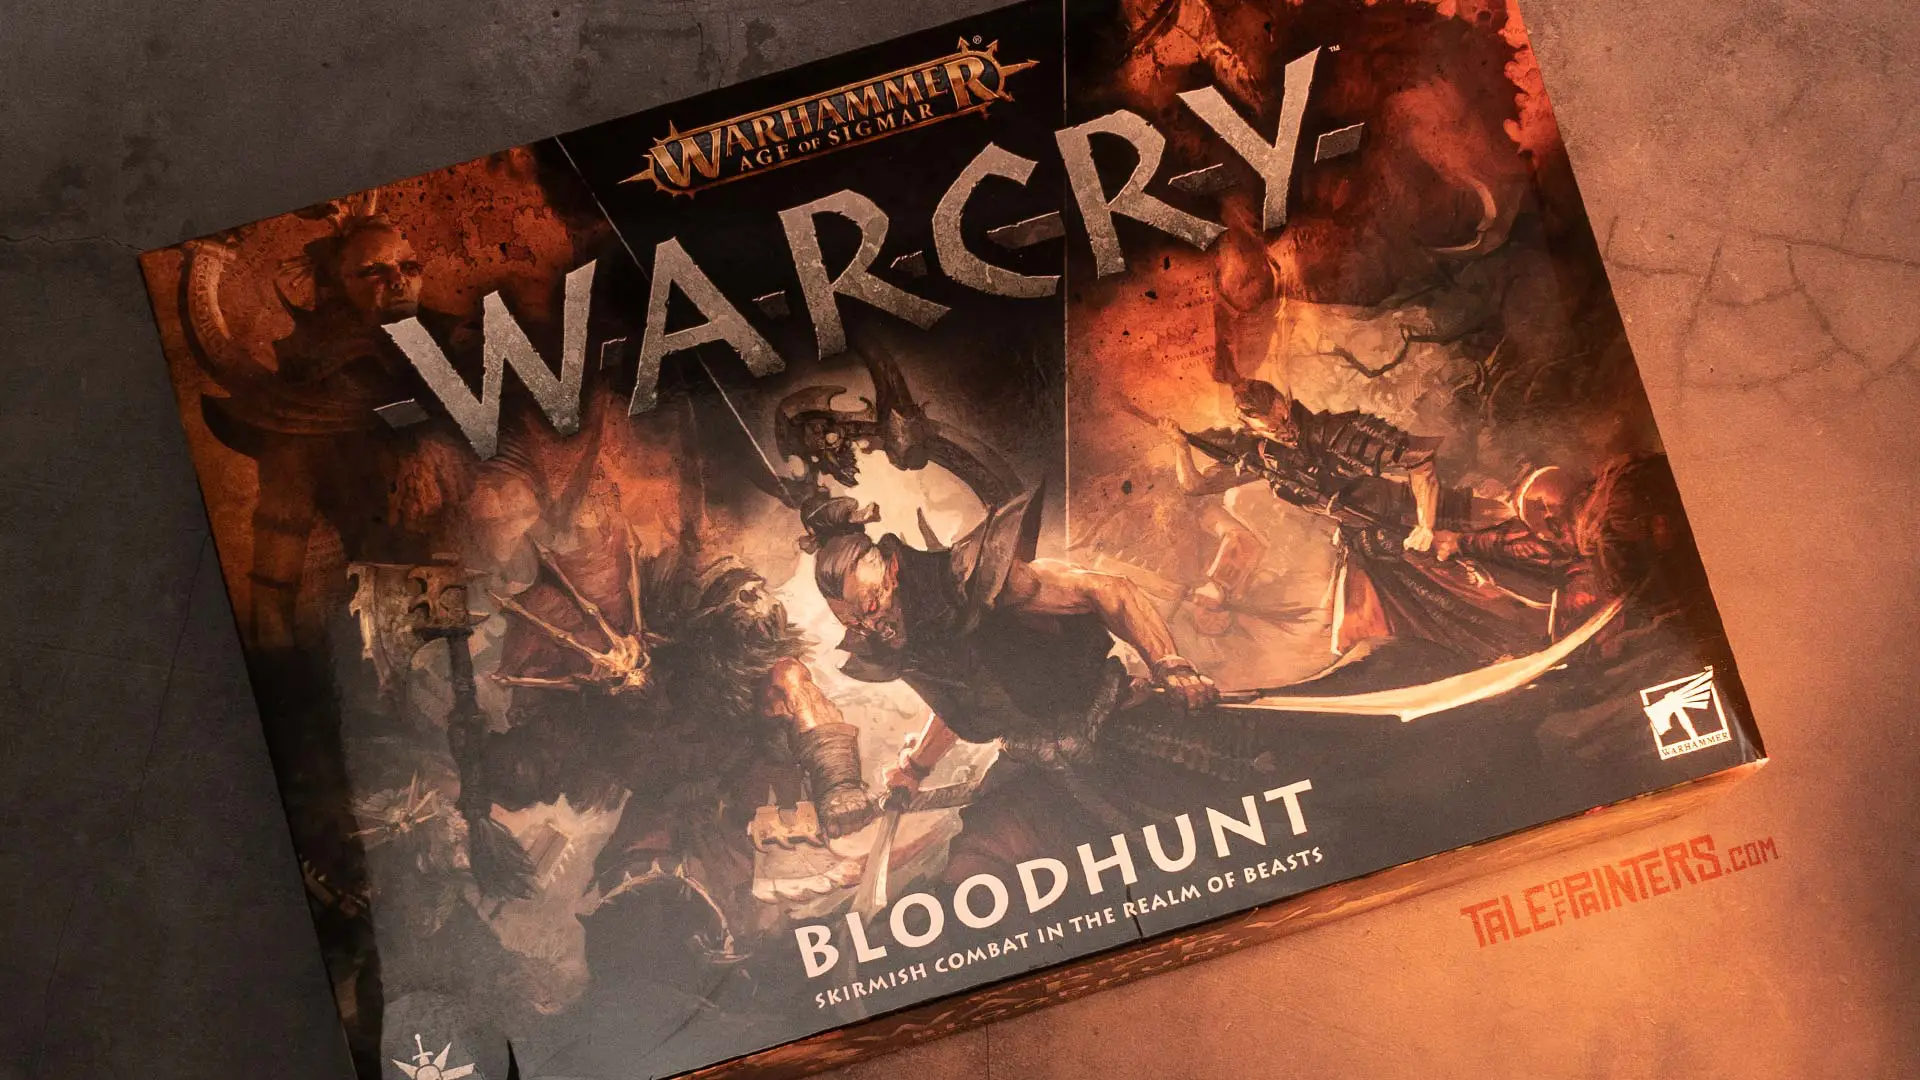 10 Things About Bloodhunt You Only Know If You've Played The Tabletop Game